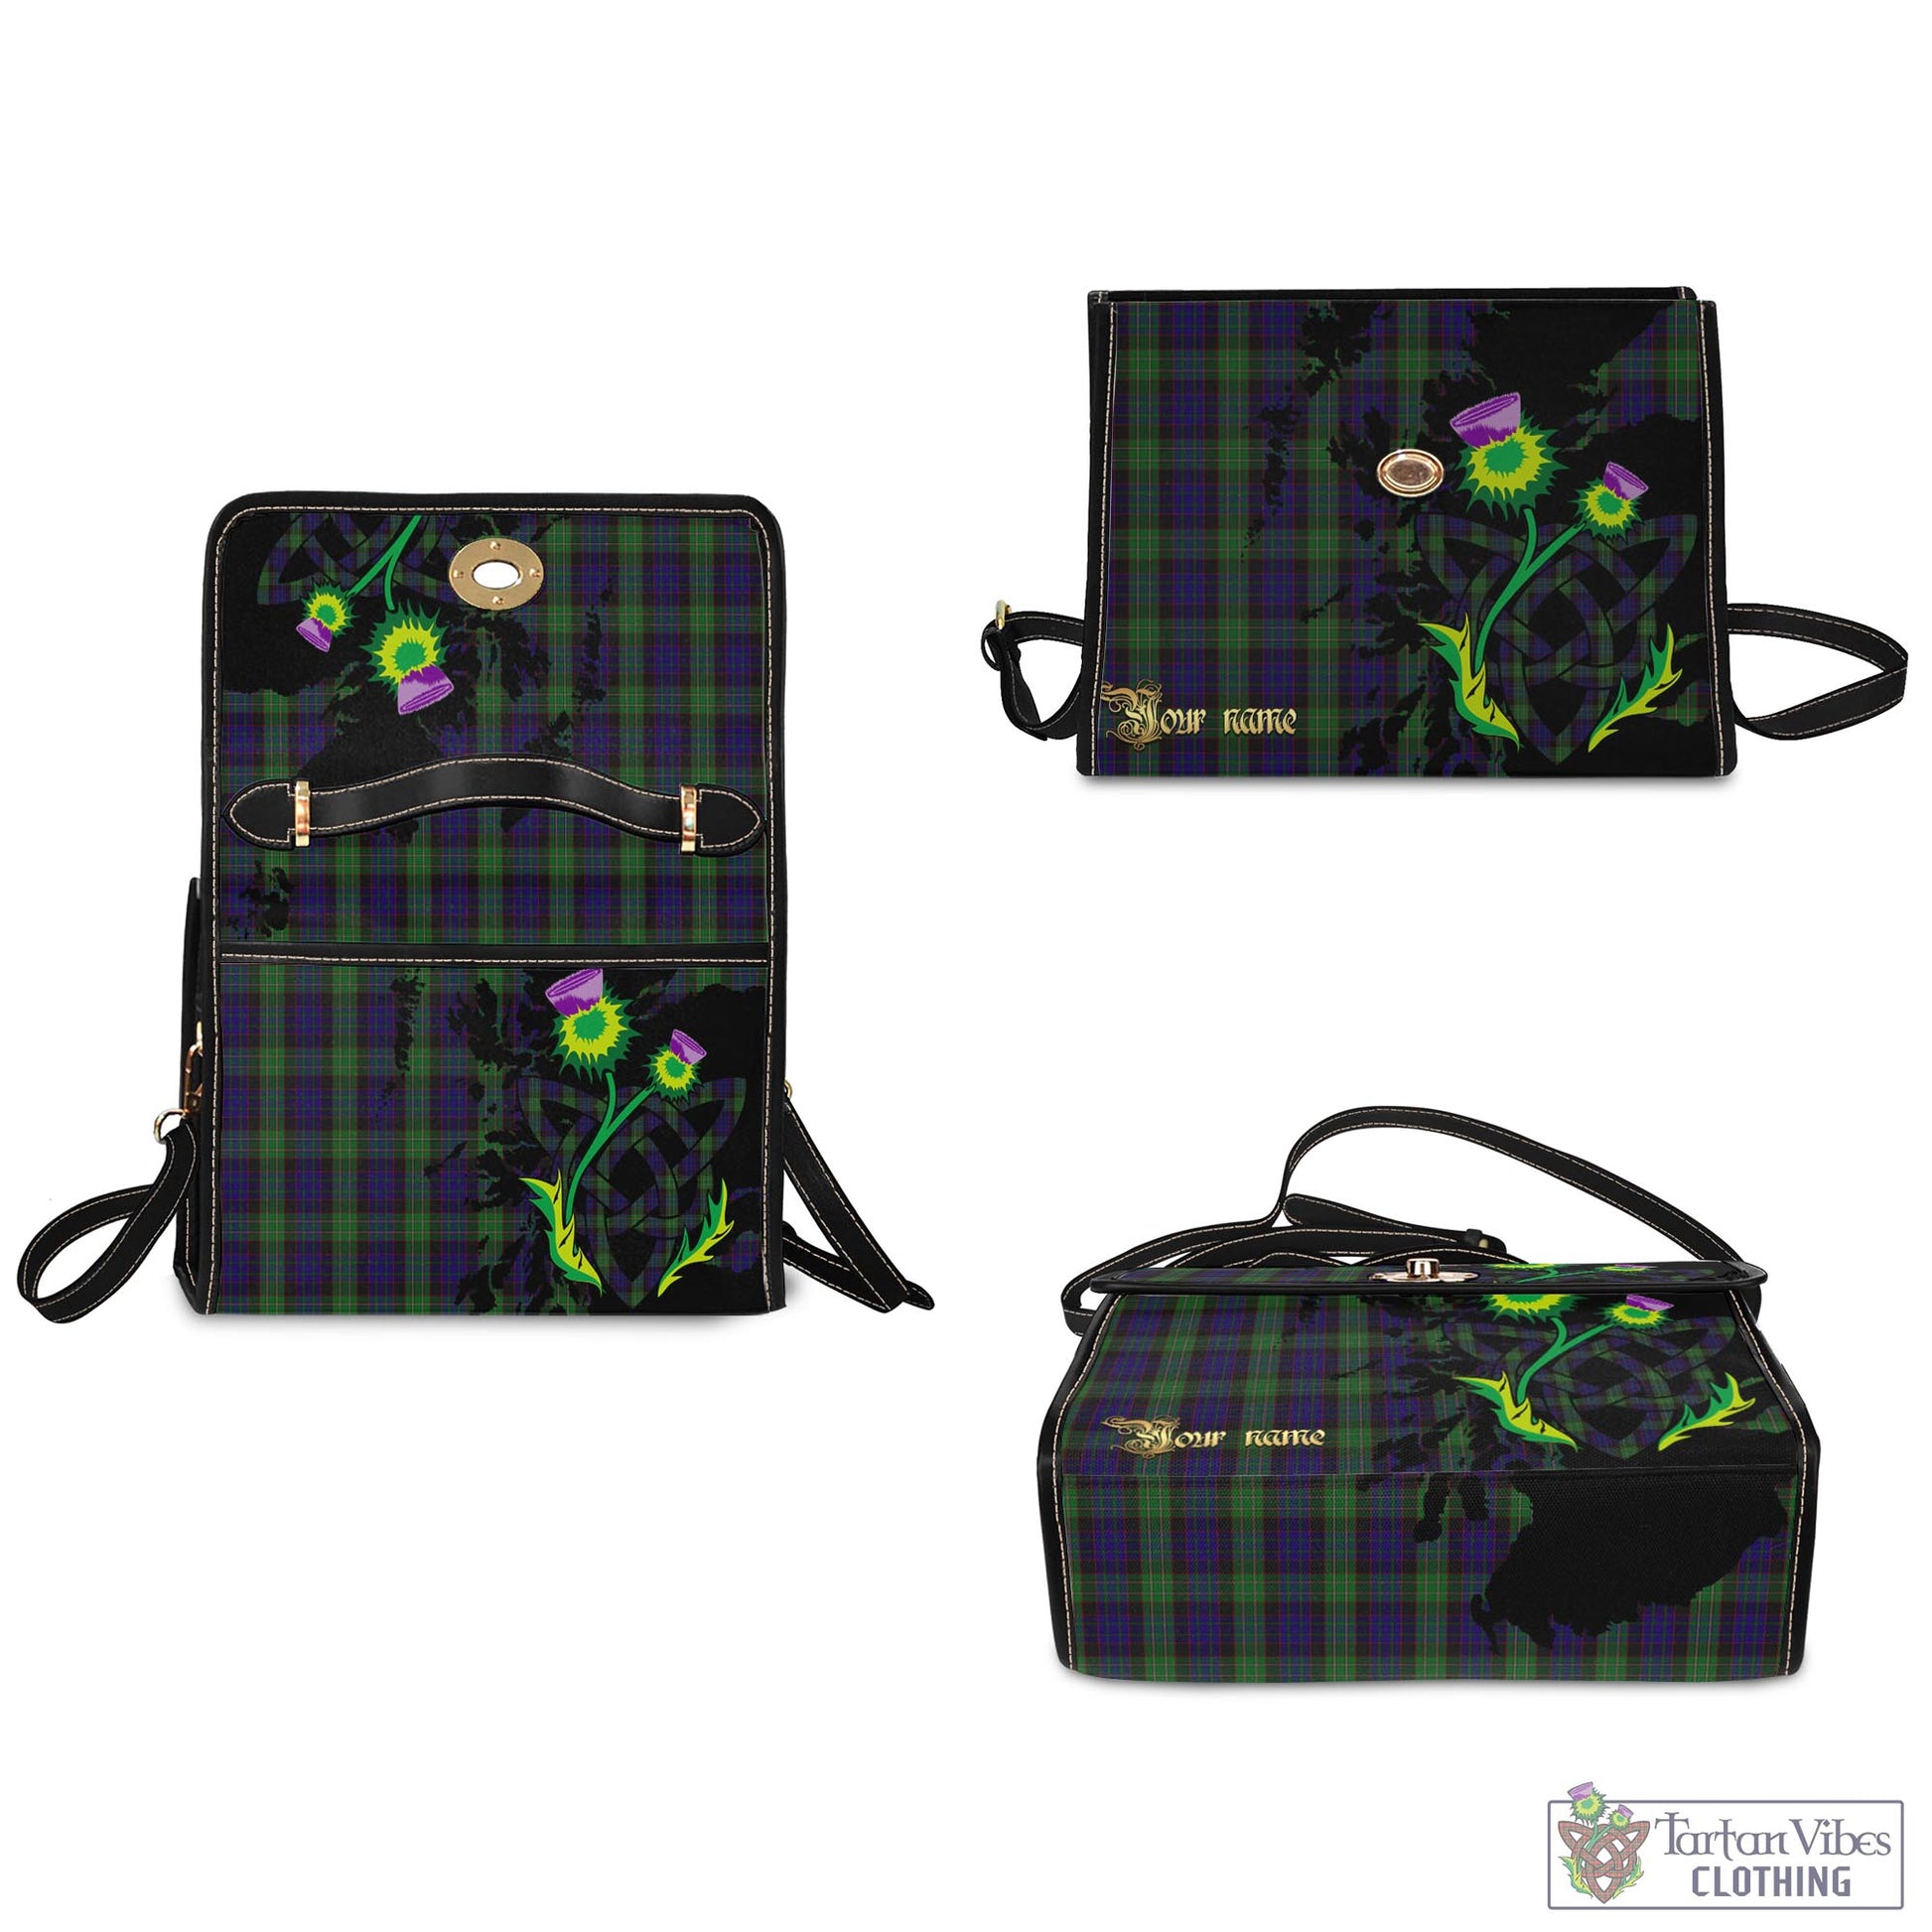 Tartan Vibes Clothing Nicolson Green Hunting Tartan Waterproof Canvas Bag with Scotland Map and Thistle Celtic Accents